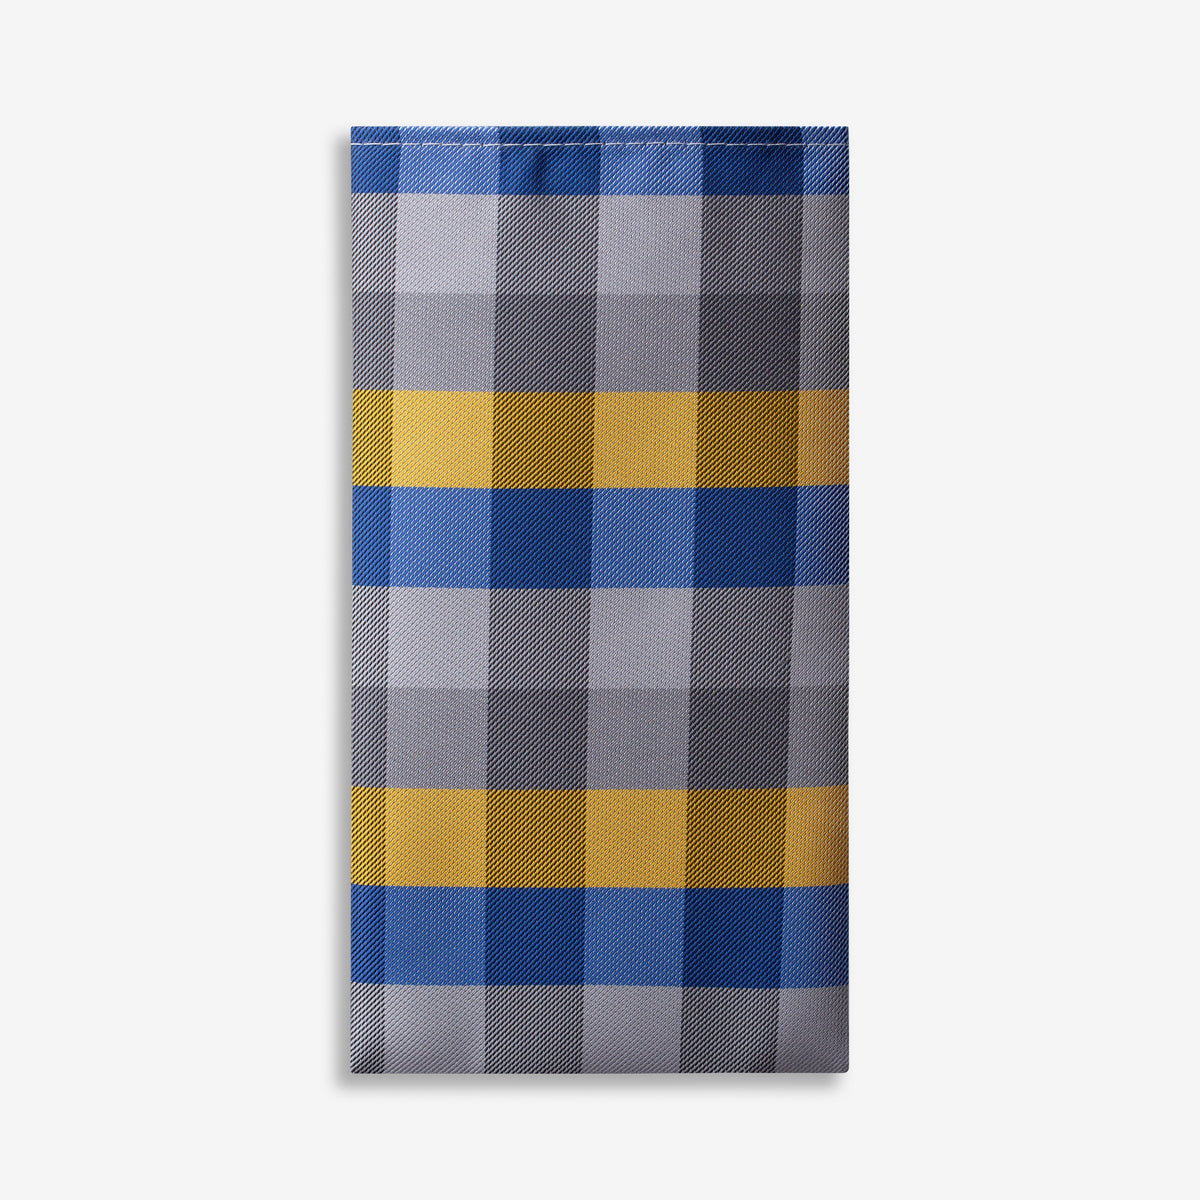 The Conner Pocket Square